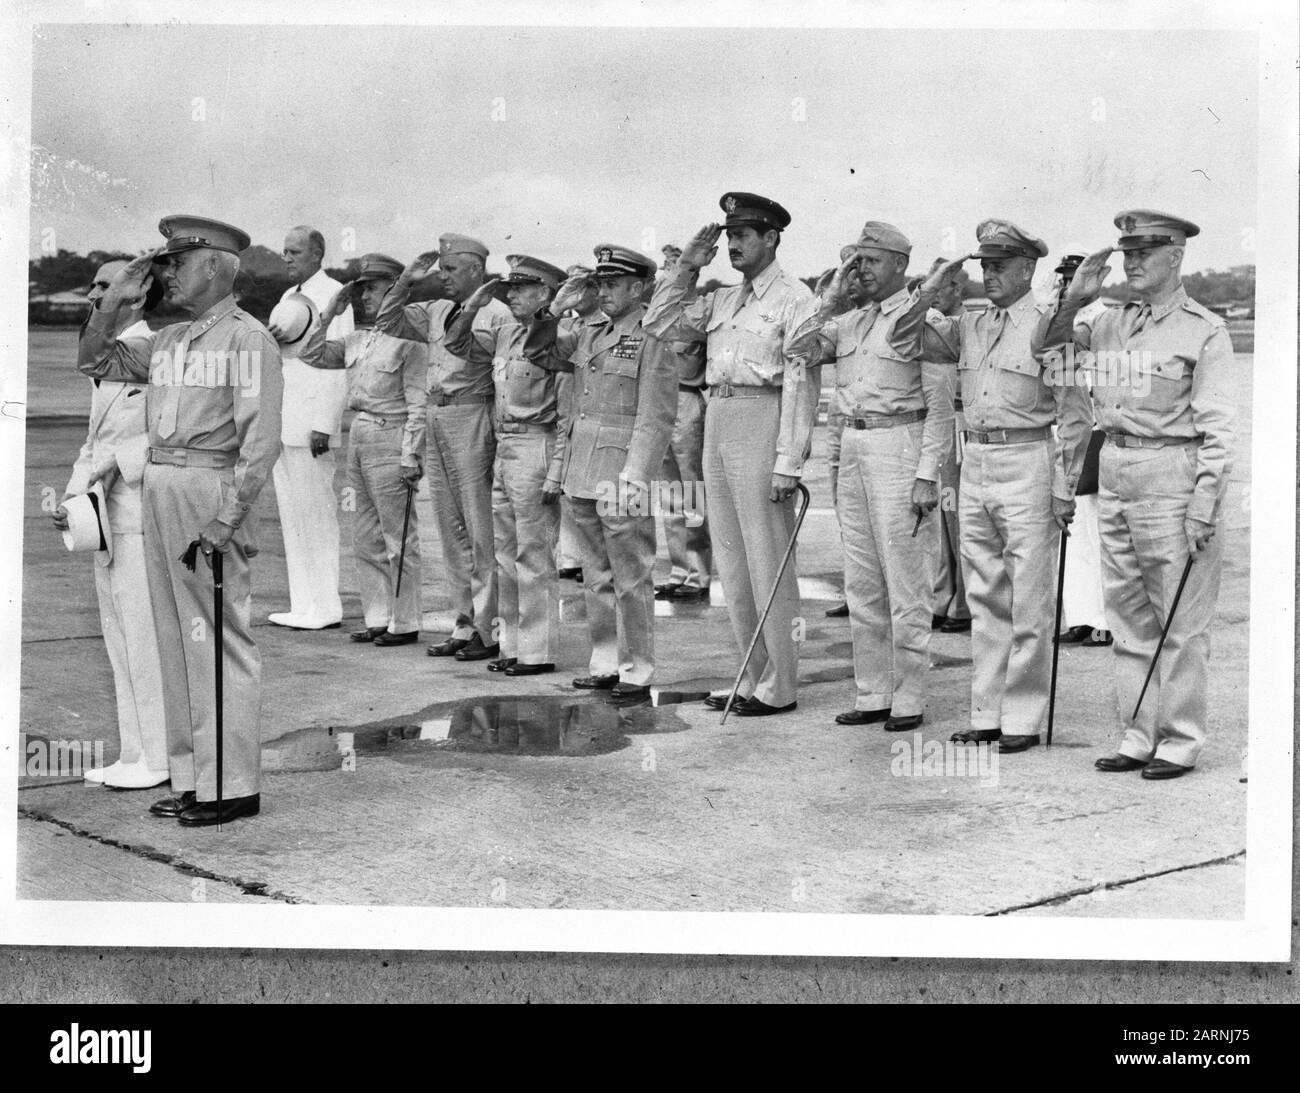 Governor Castle and Admiral Beatty arrive at Albrook Field (Panama). The Governor of the Netherlands Antilles Dr. P.A. Castle with next to him Lieutenant General George H. Brett (commander Caribbean Defence Command and Panama Canal Department) while playing the Dutch and American folk songs. Behind them (vnr) Major General Joseph C. Mehaffey (Governor of Panama Canal); Maj-Gen W.E. Shedd (Head of Antilles Department), Rear Admiral Frank E. Beatty (Marine Commander Curaçao), Maj-General E.F. Harding (Commander Panama Mobile Force); Captain at sea Ellis S. Stone ( Commander 15th Naval District C Stock Photo